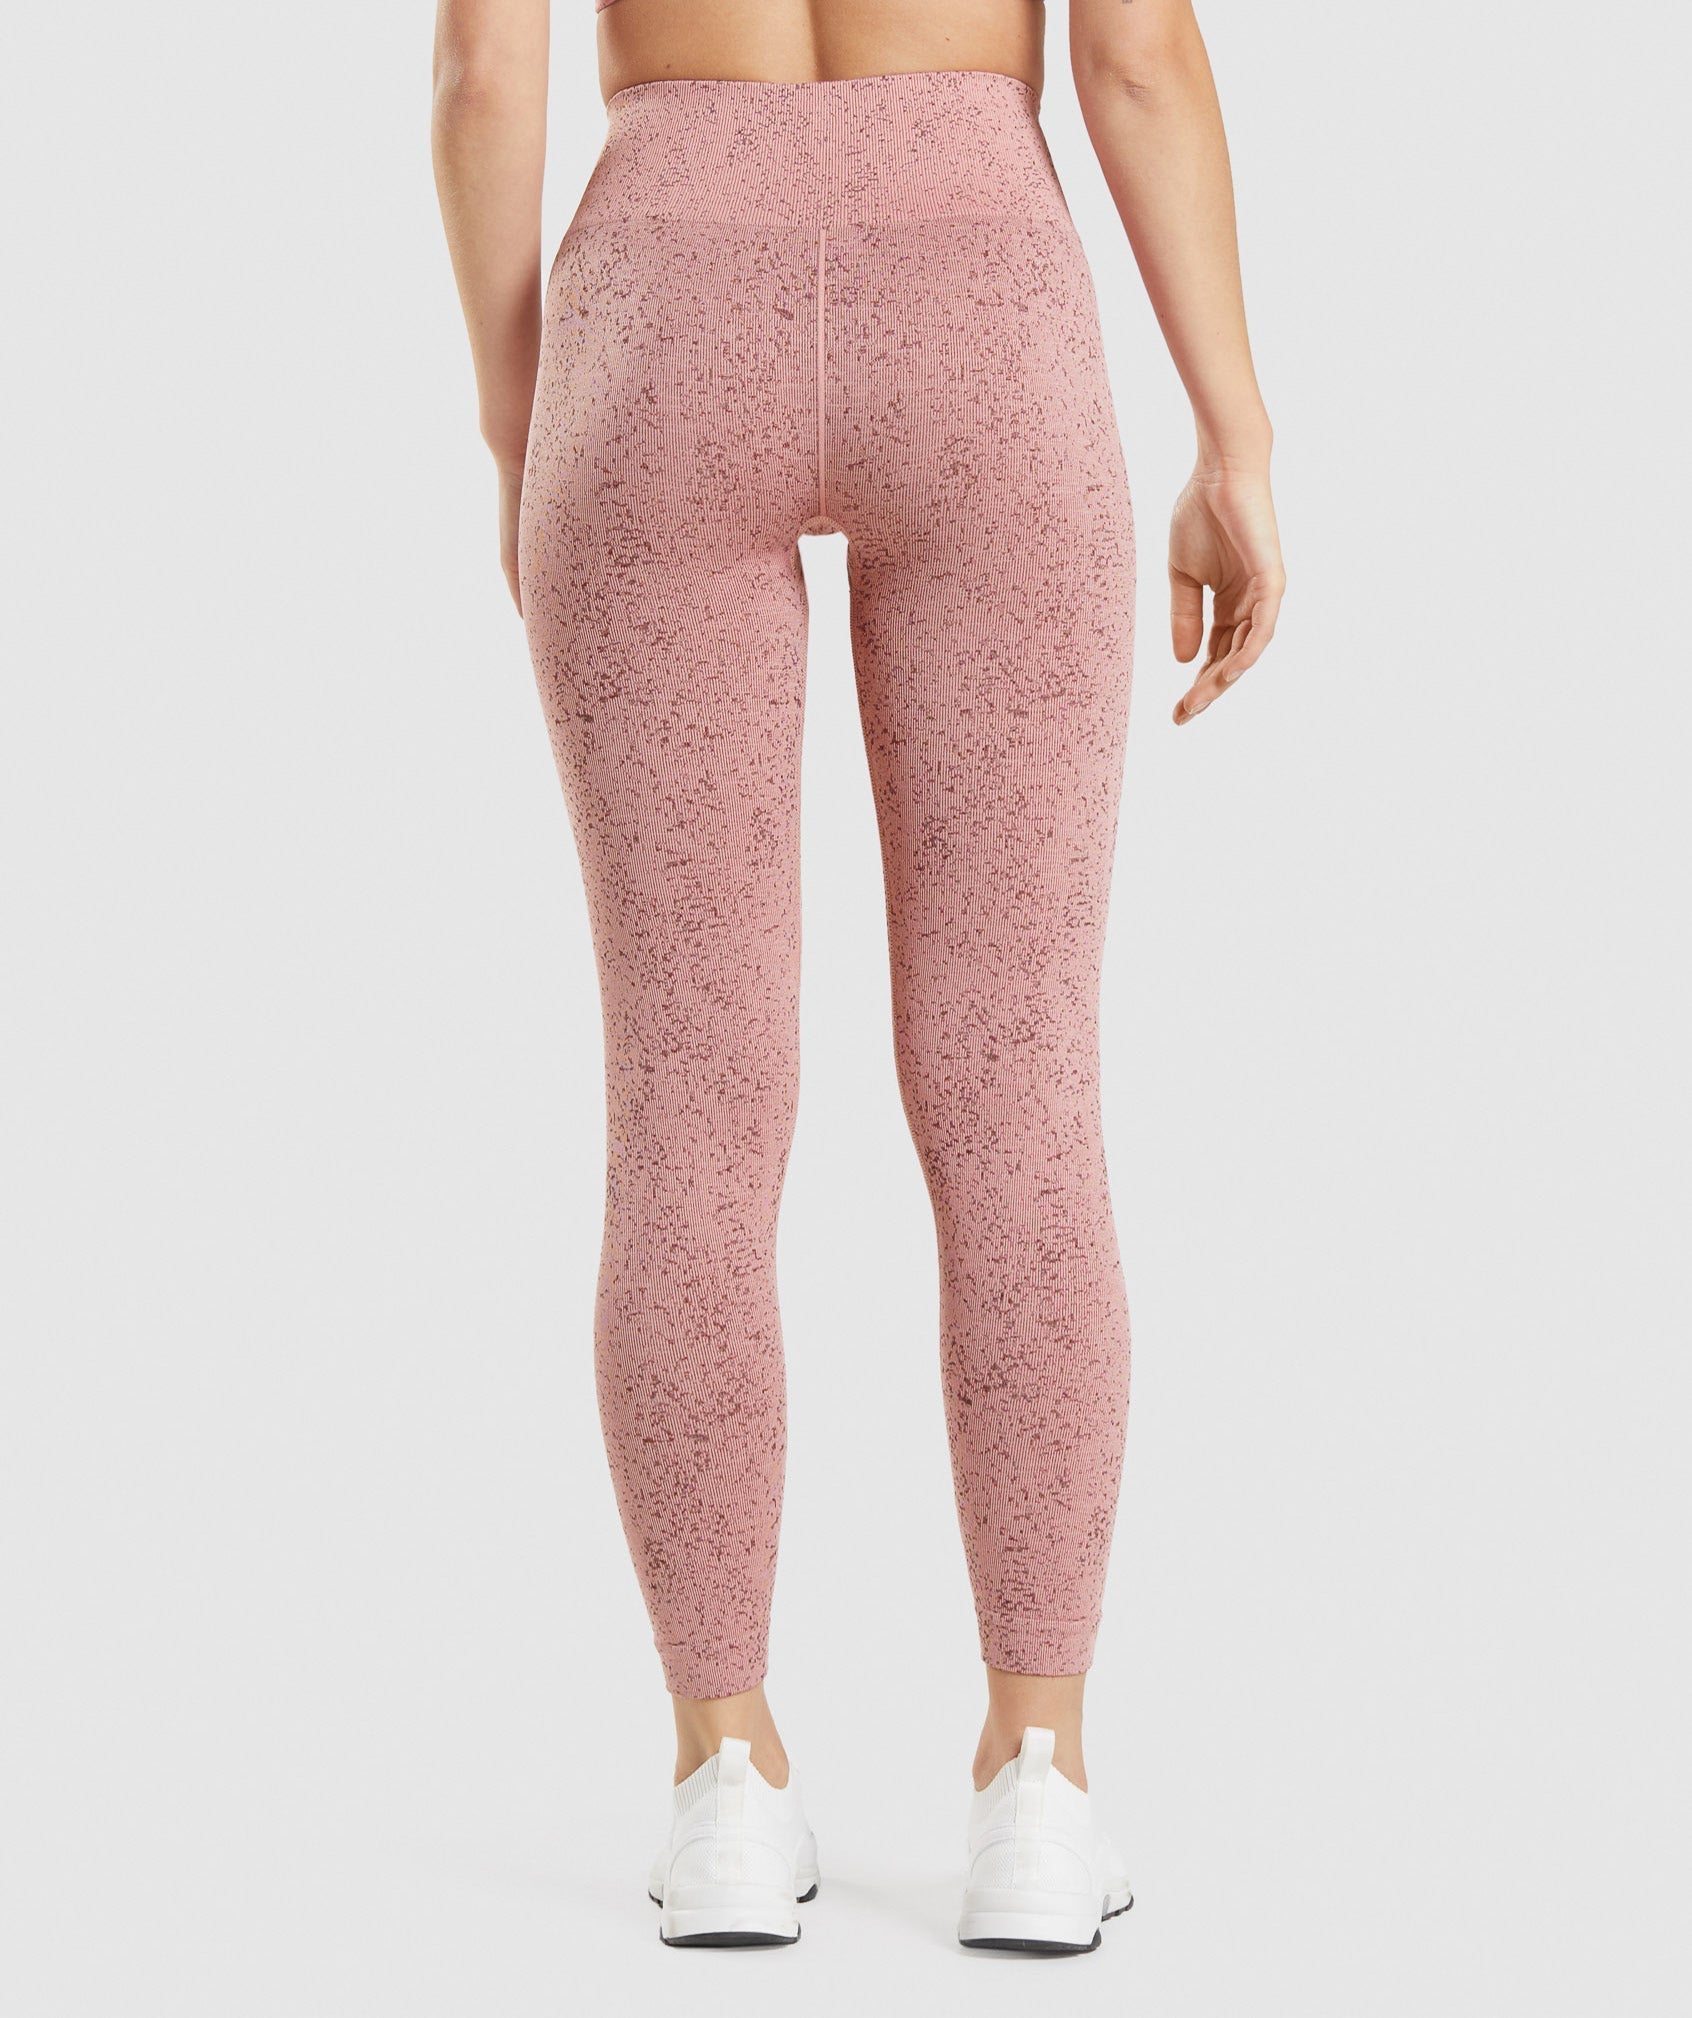 Adapt Fleck Seamless Leggings in Mineral | Paige Pink - view 2